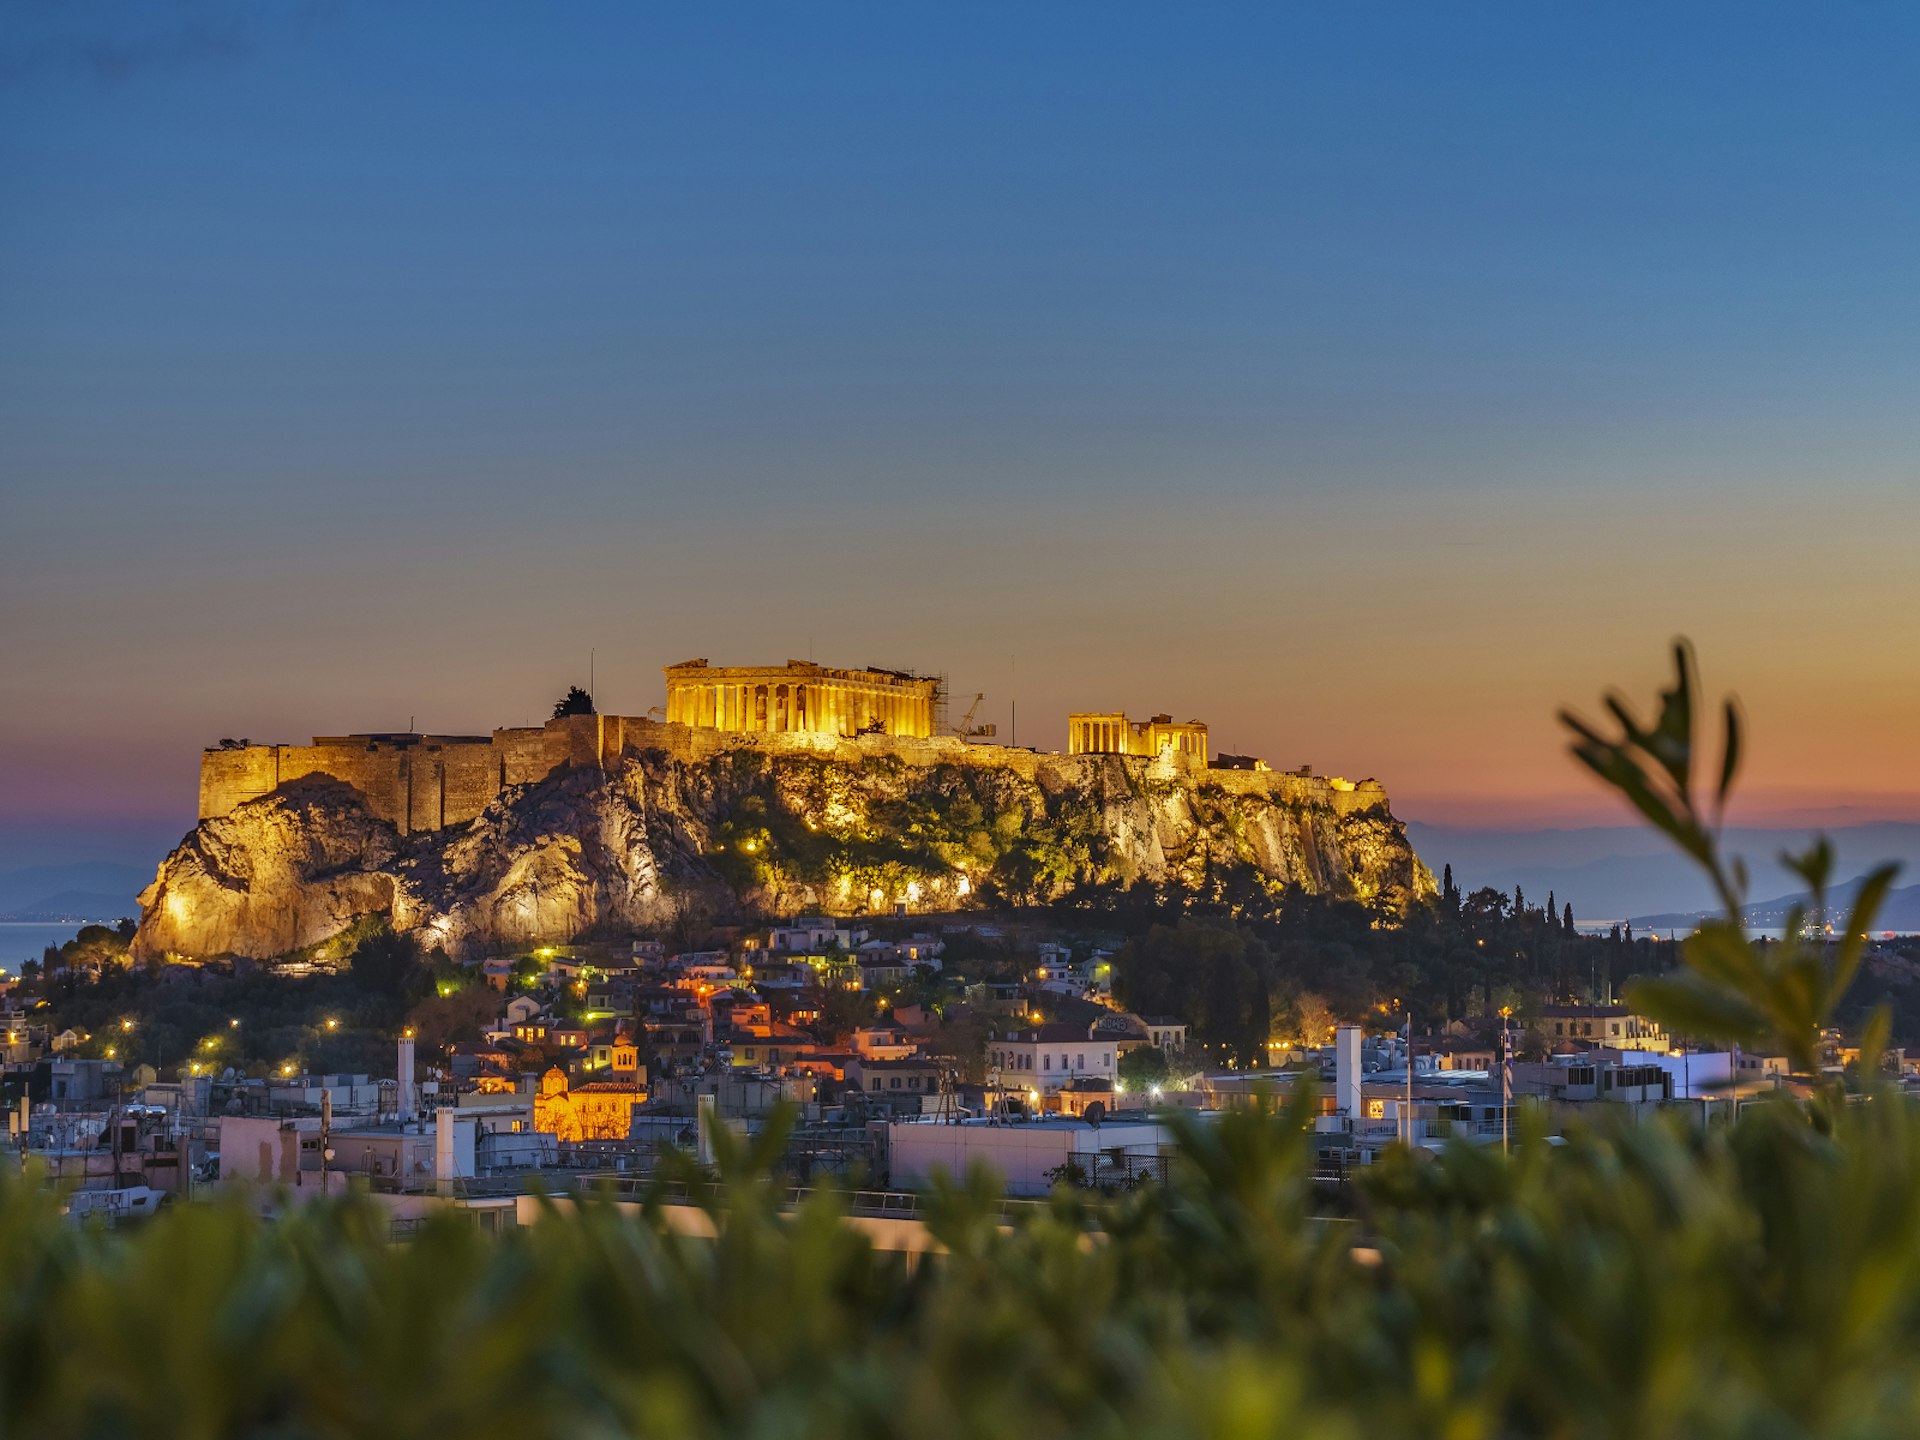  Rooftop view of the Acropolis lit up at night makes for a magnificent dinner setting © Kotsovolos Panagiotis / Shutterstock